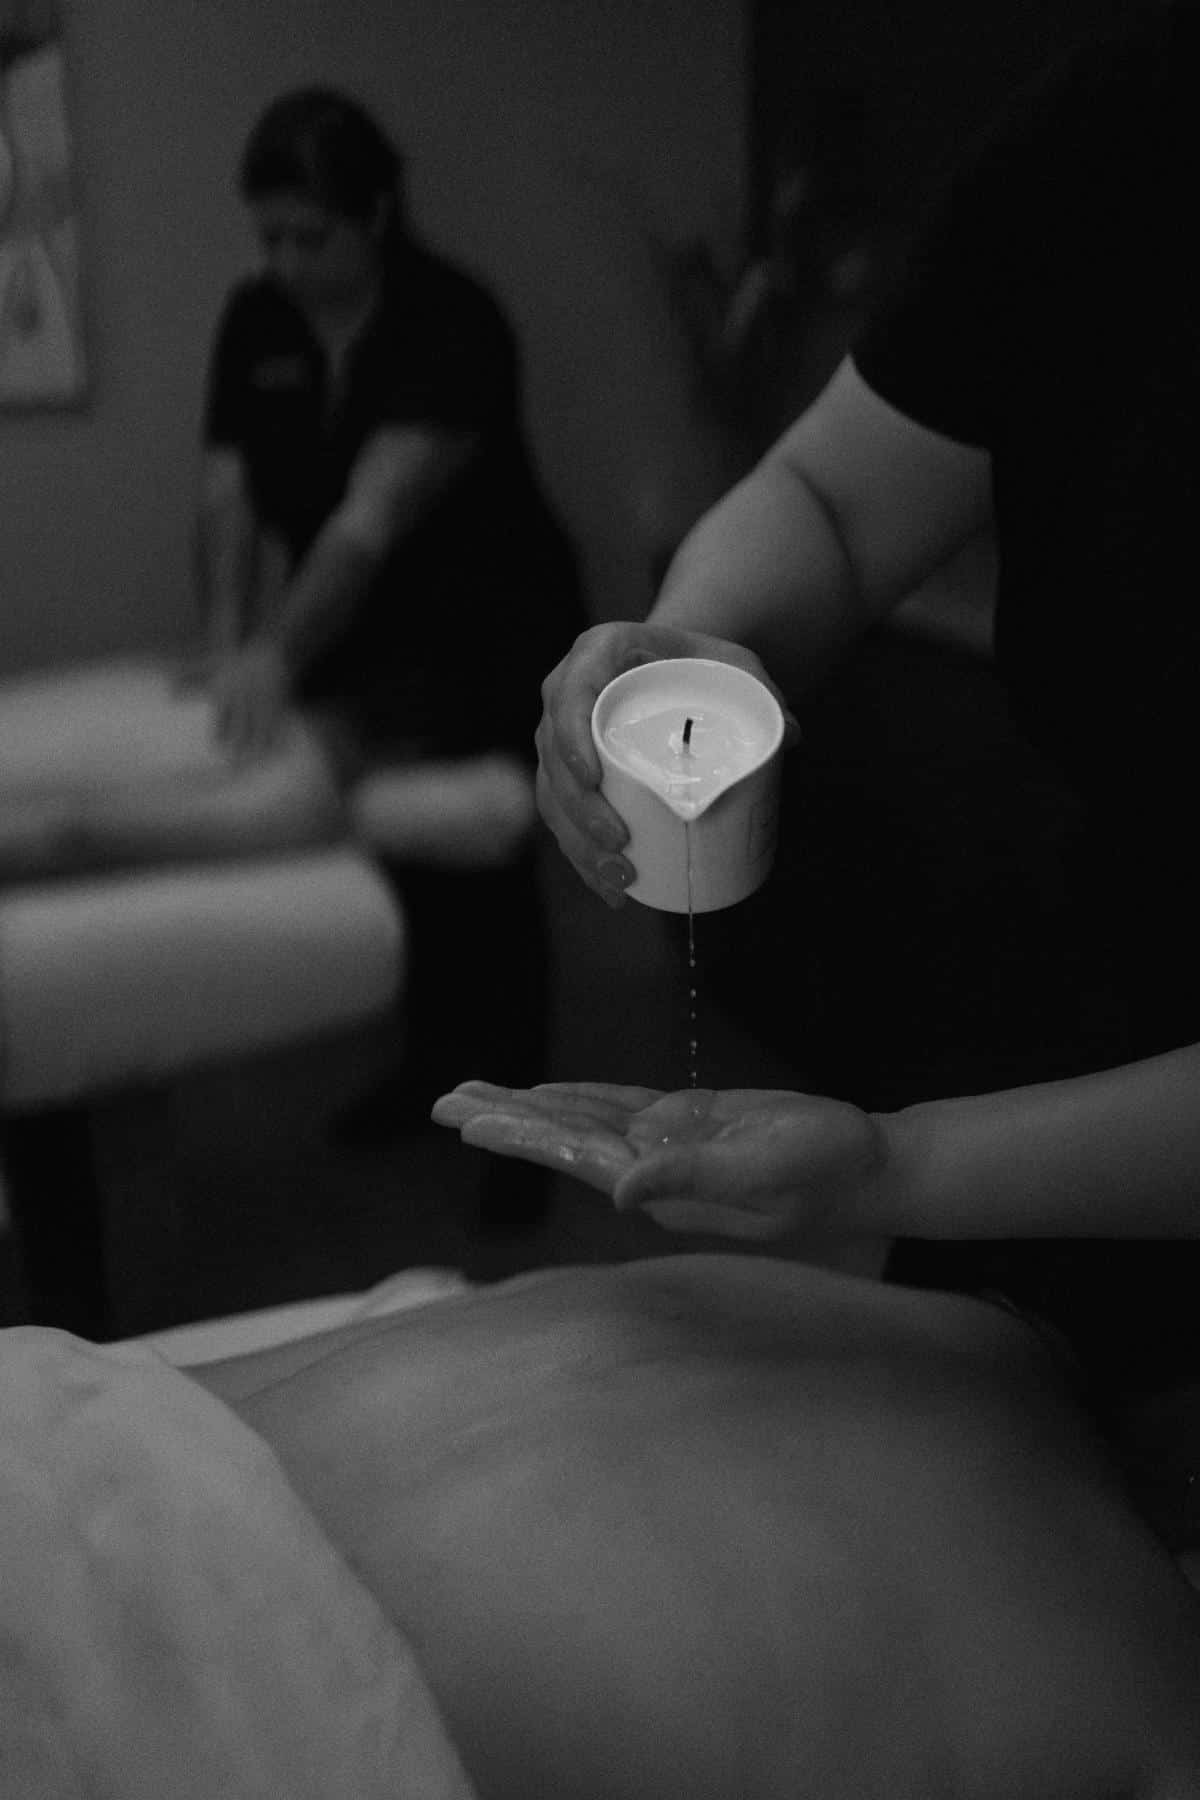 woman pouring candlewax on hand for spa experience